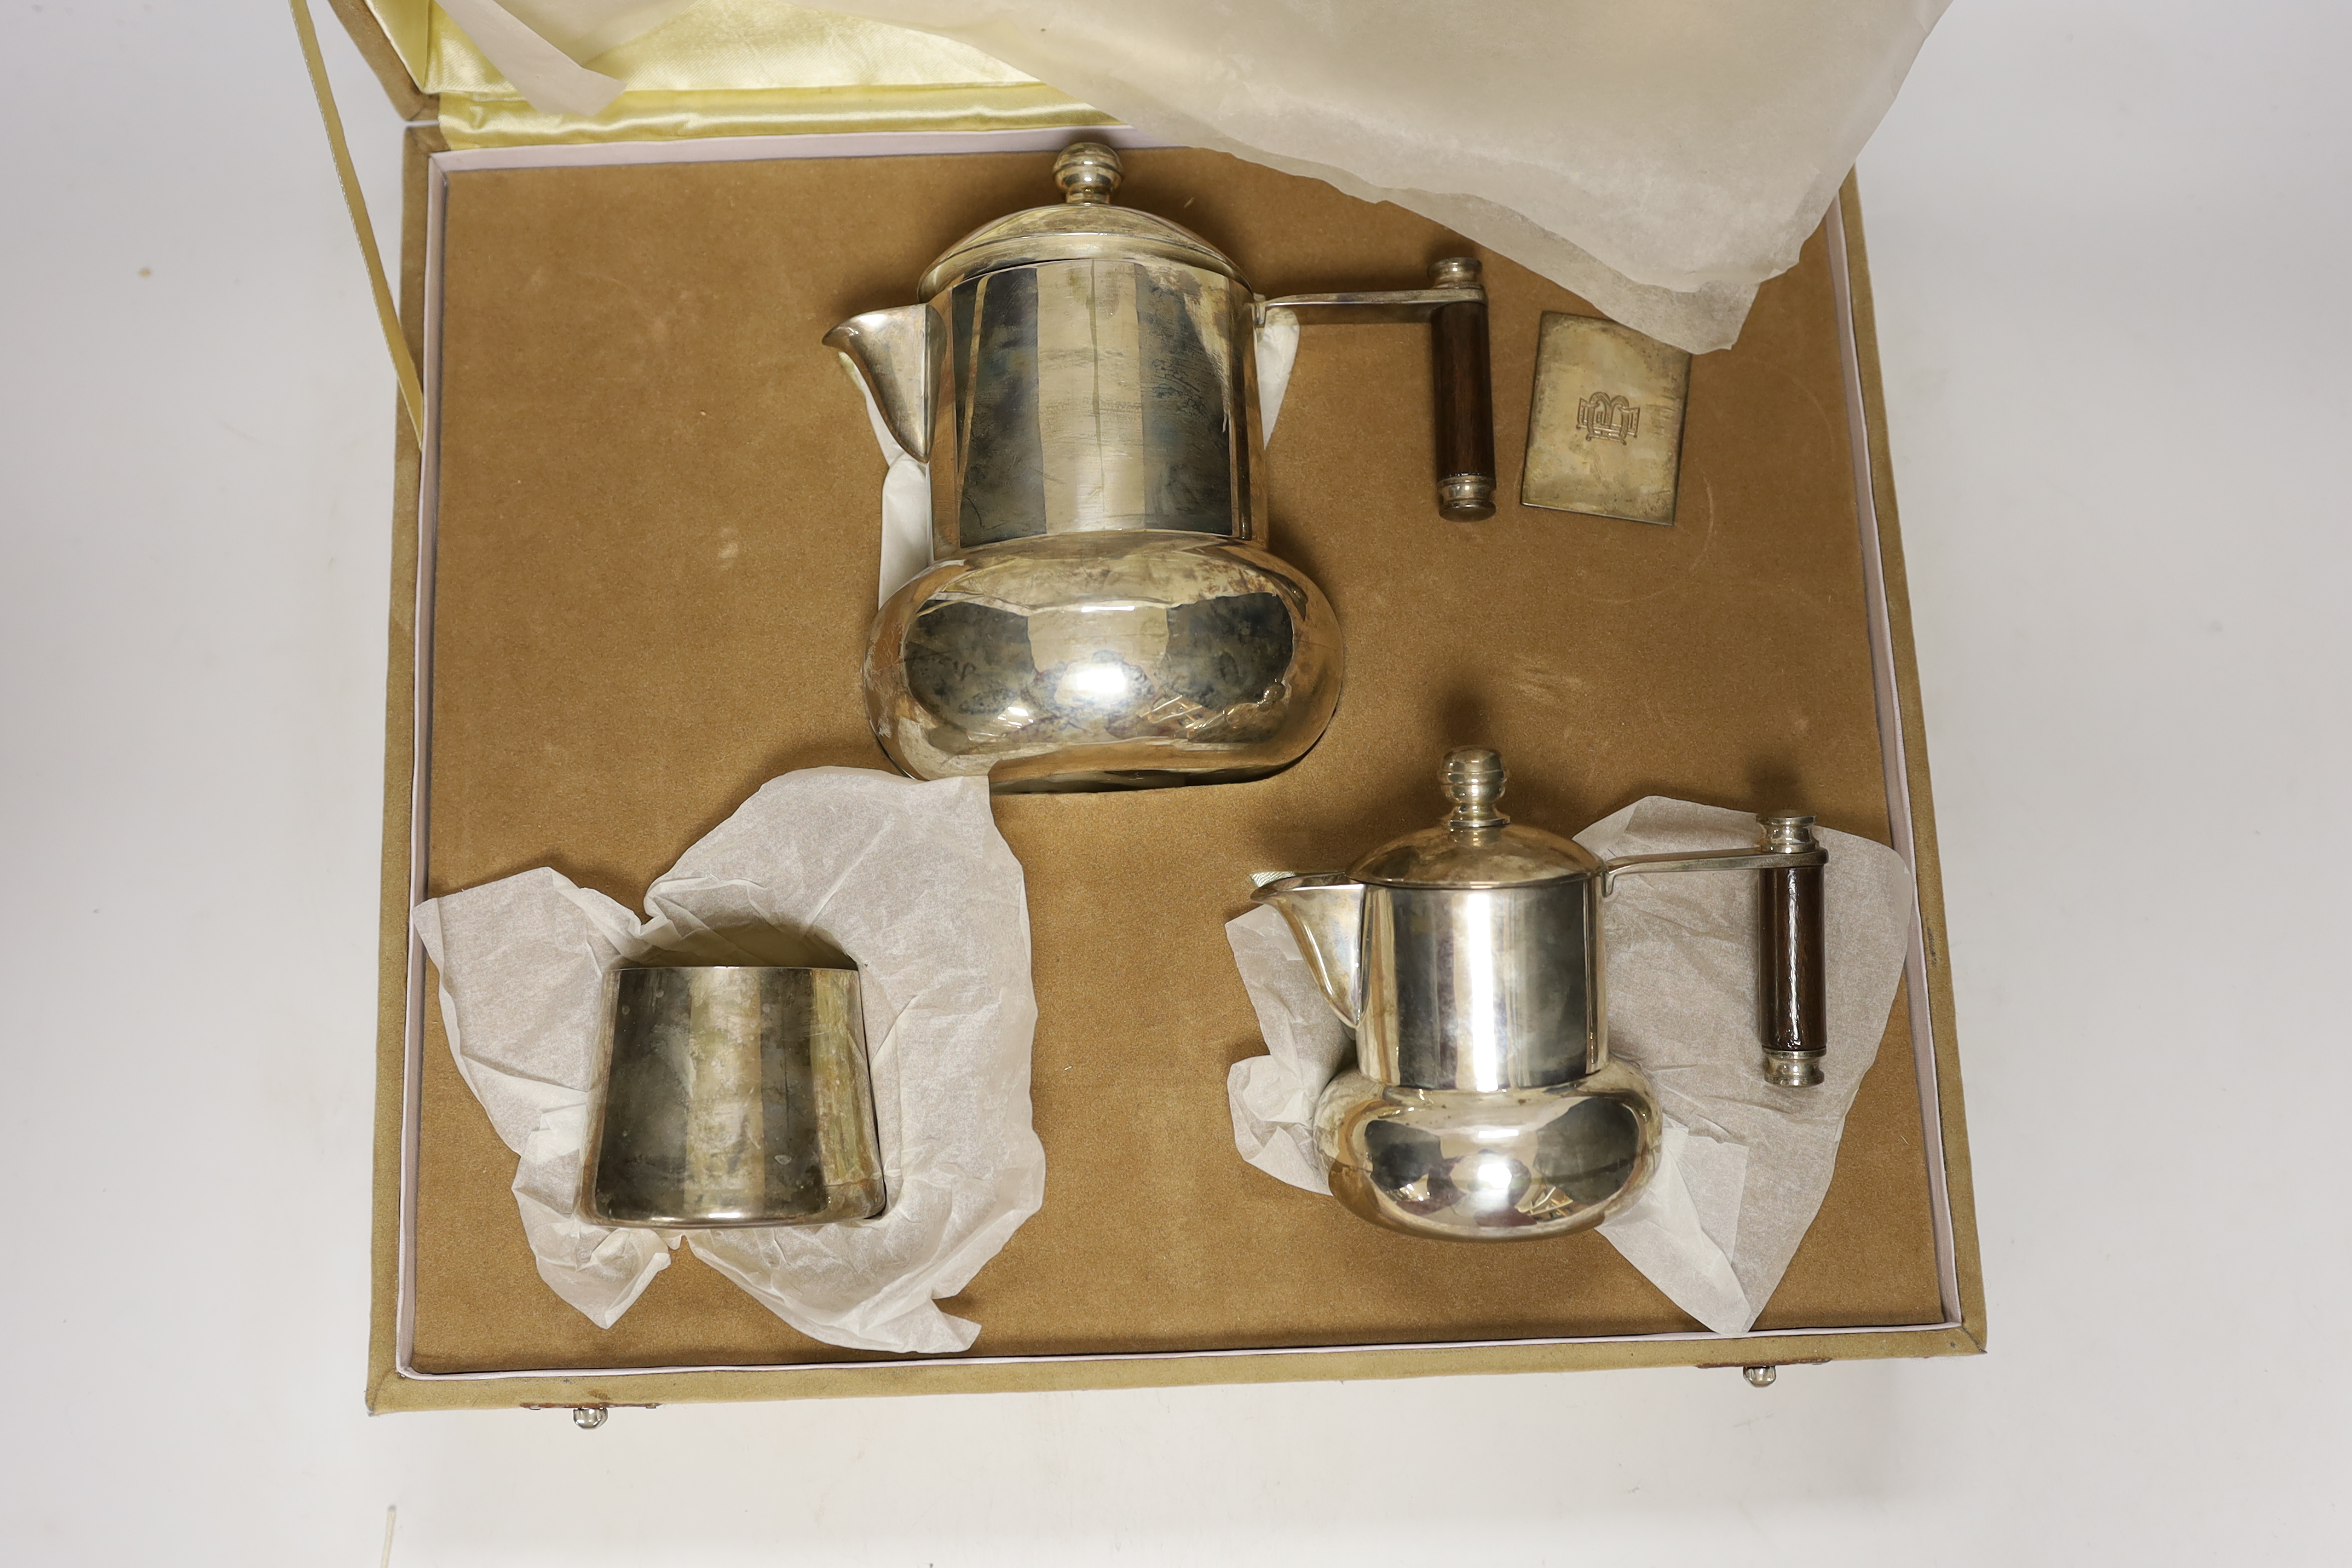 A cased Indian plated tea set, Cooke & Kelvey, Calcutta - Image 2 of 3